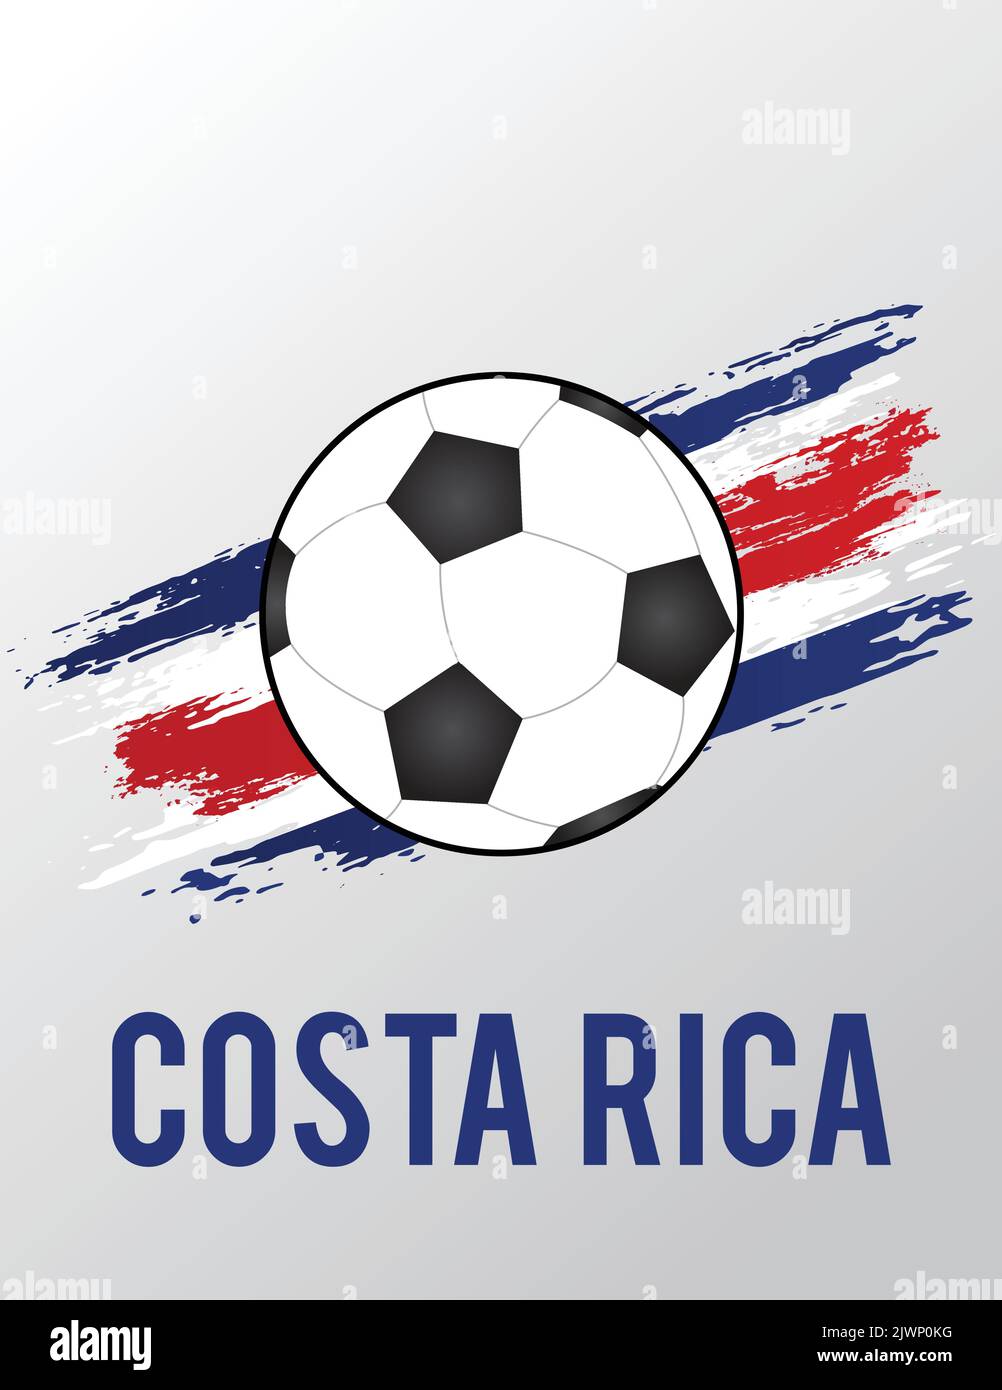 Costa Rica flag with Brush Effect for Soccer Theme Stock Vector